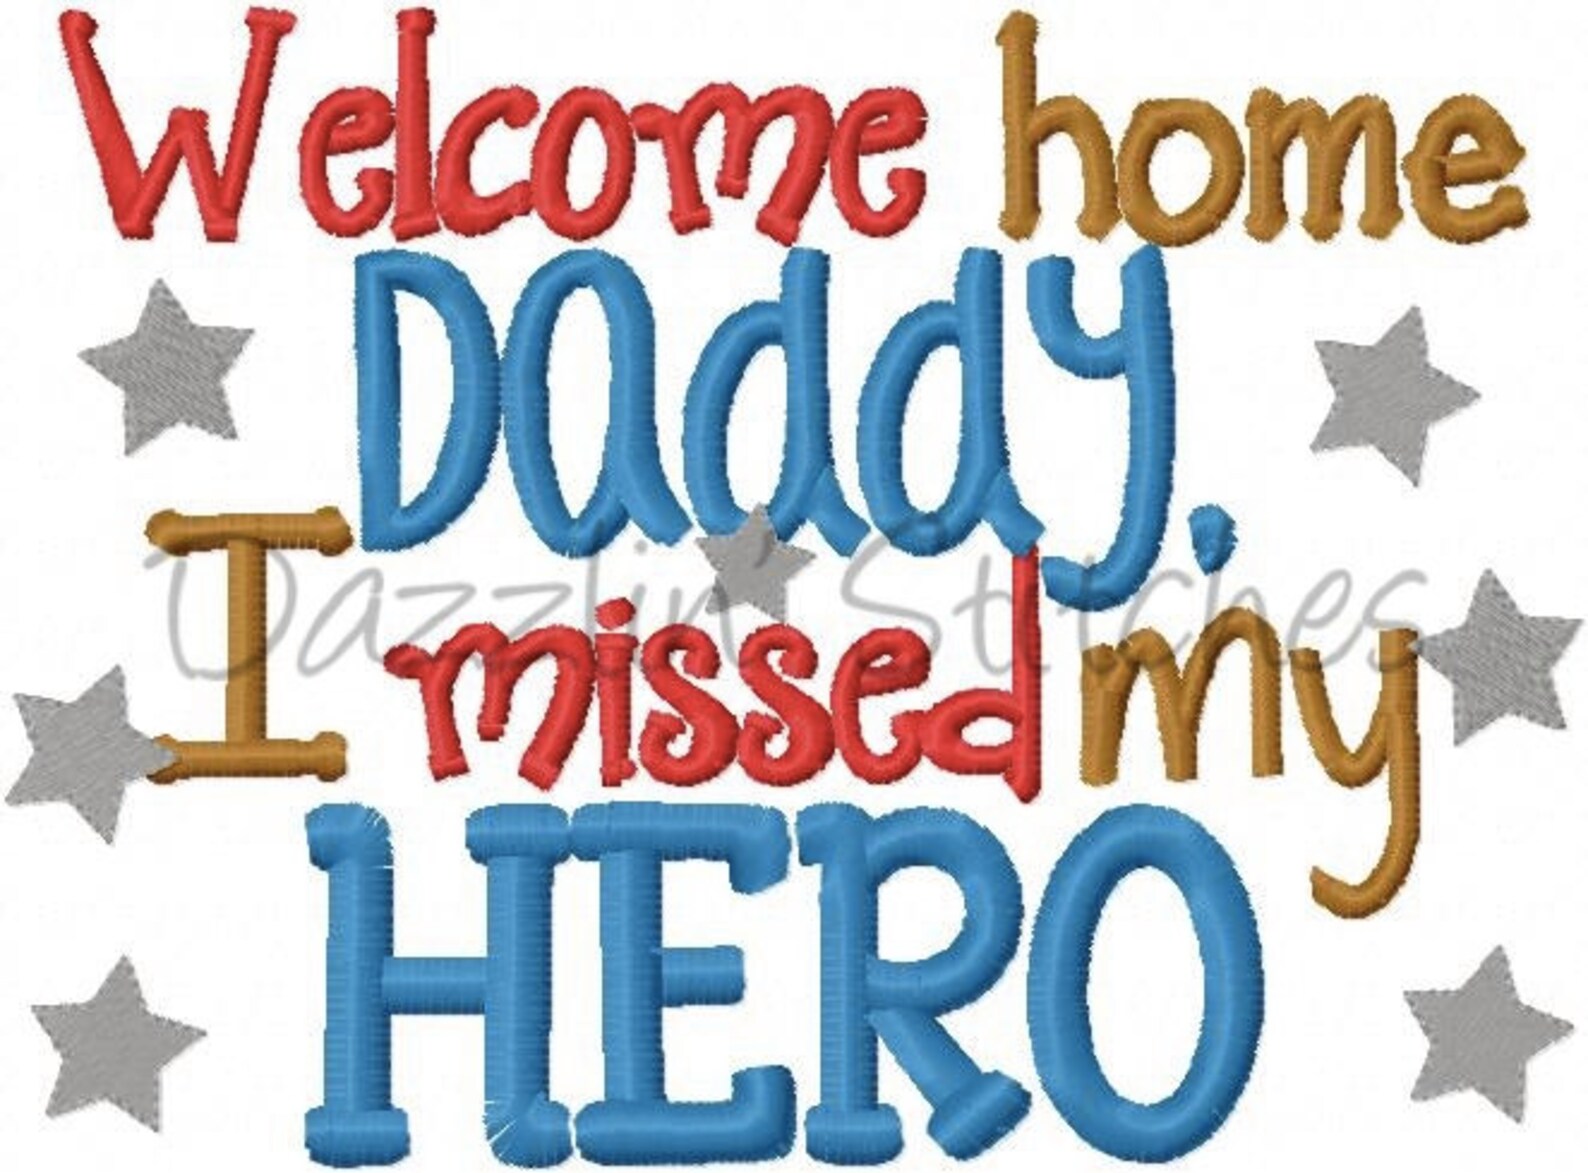 Welcome home daddy